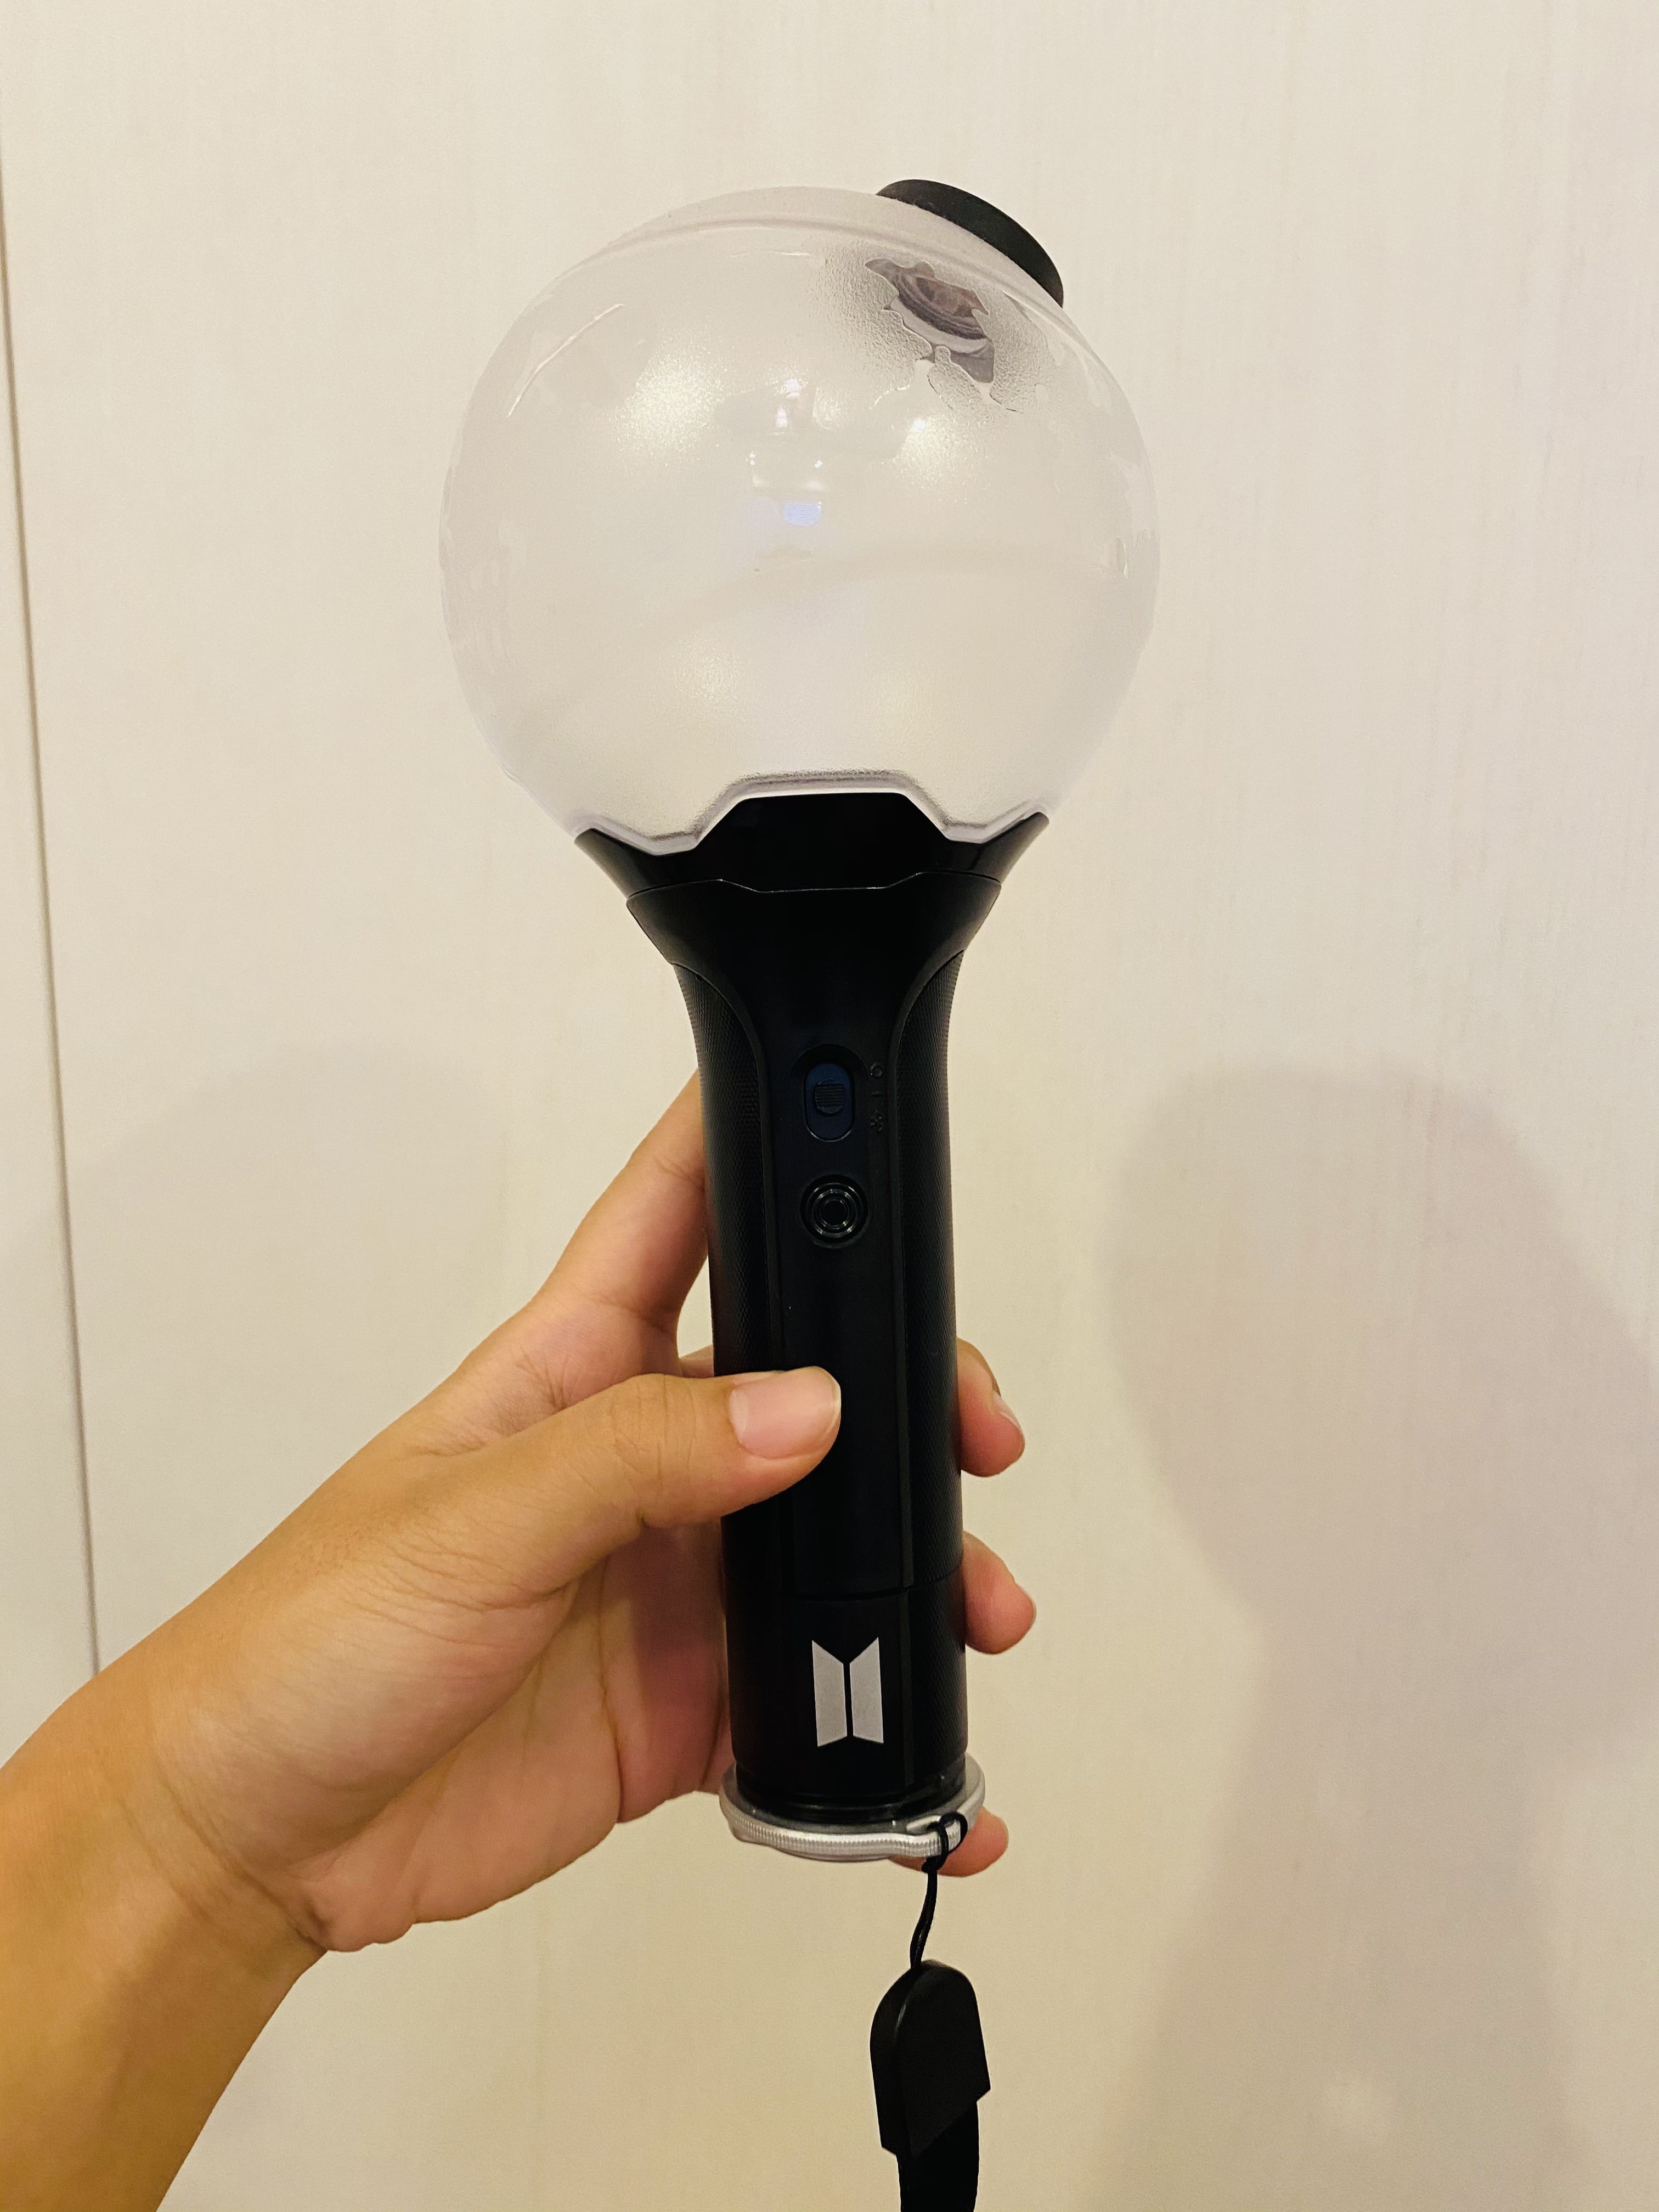 Official army bomb( BTS light stick), Hobbies & Toys, Memorabilia &  Collectibles, K-Wave on Carousell